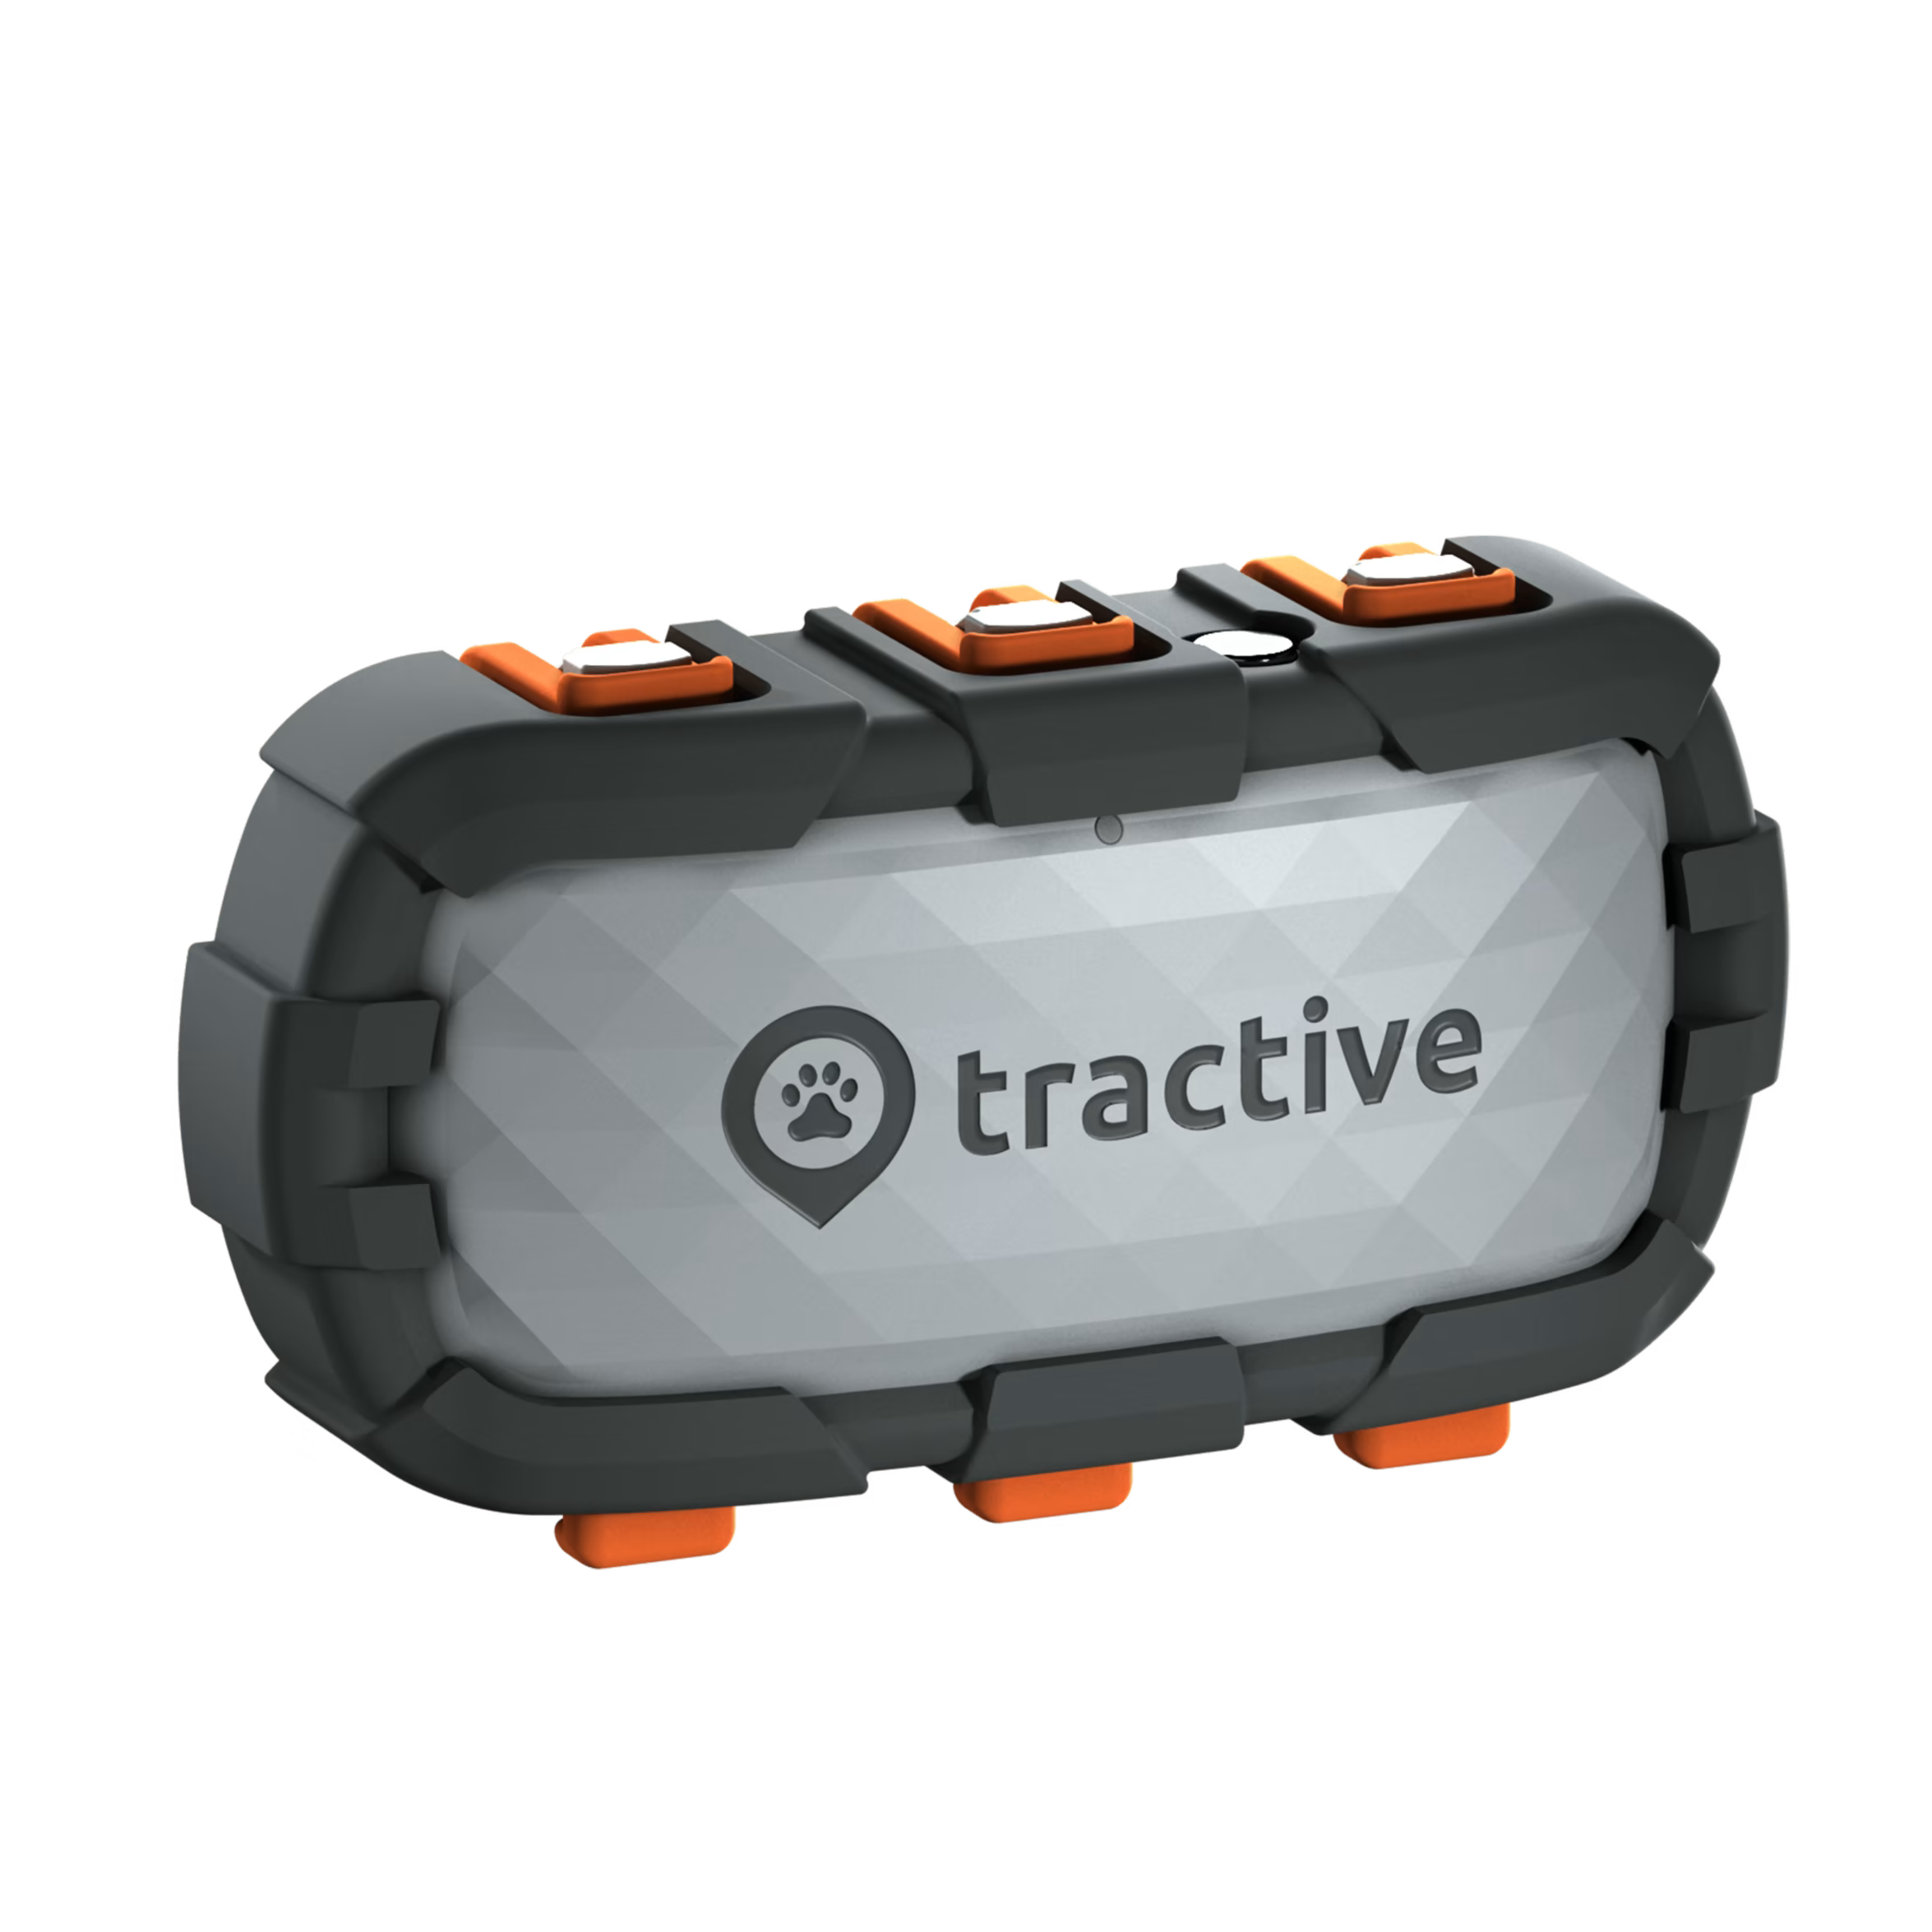 tractive-dog-xl-adventure-tracker.png